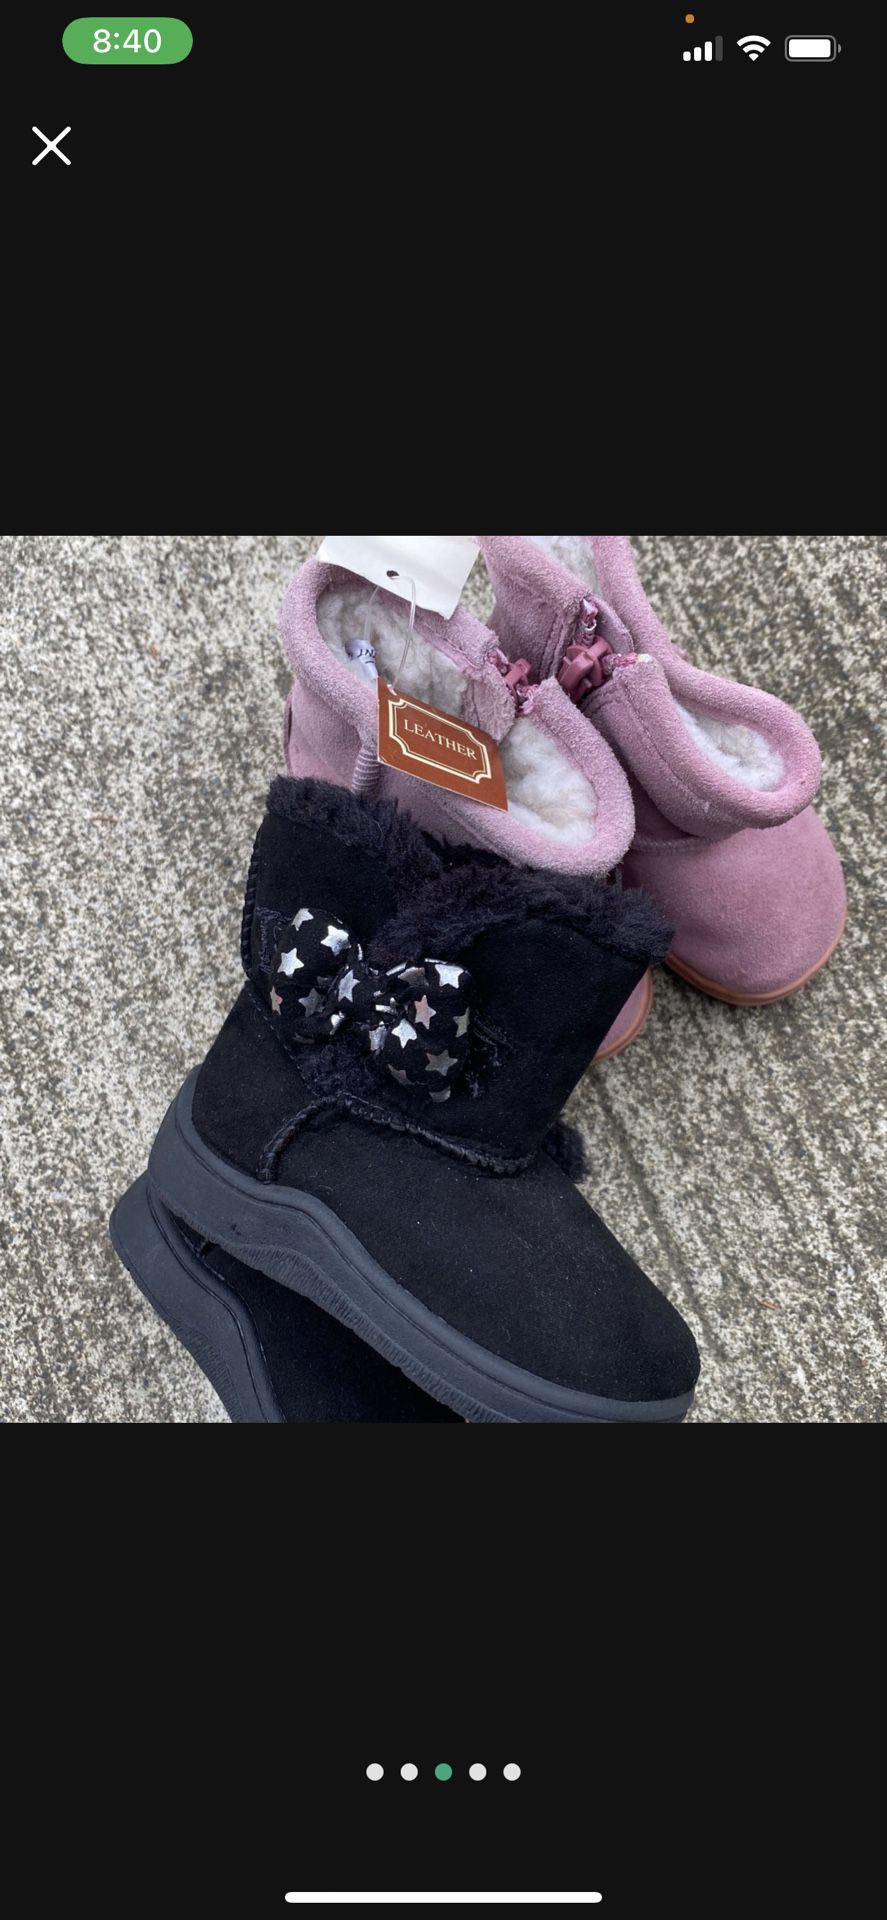 Brand New Baby Boots Pink Size 4 And Black Size 3 Both Pairs Never Been Used 